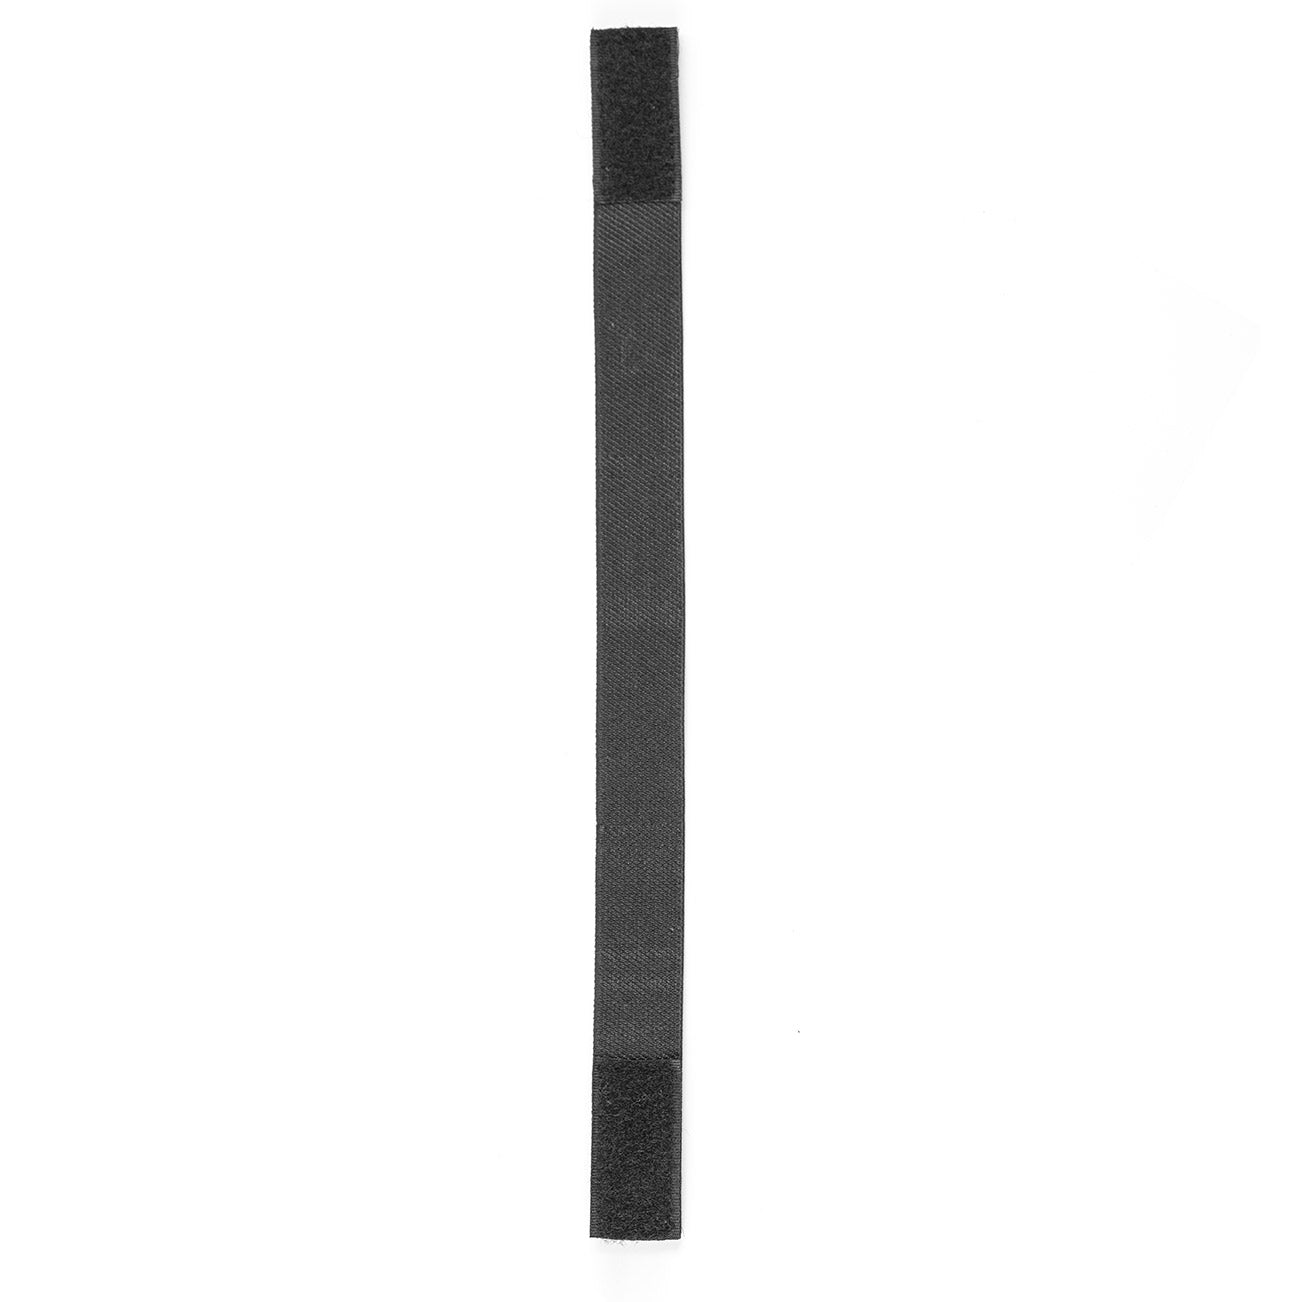 RS9 Patella Cup elastic strap w/ velcro ends